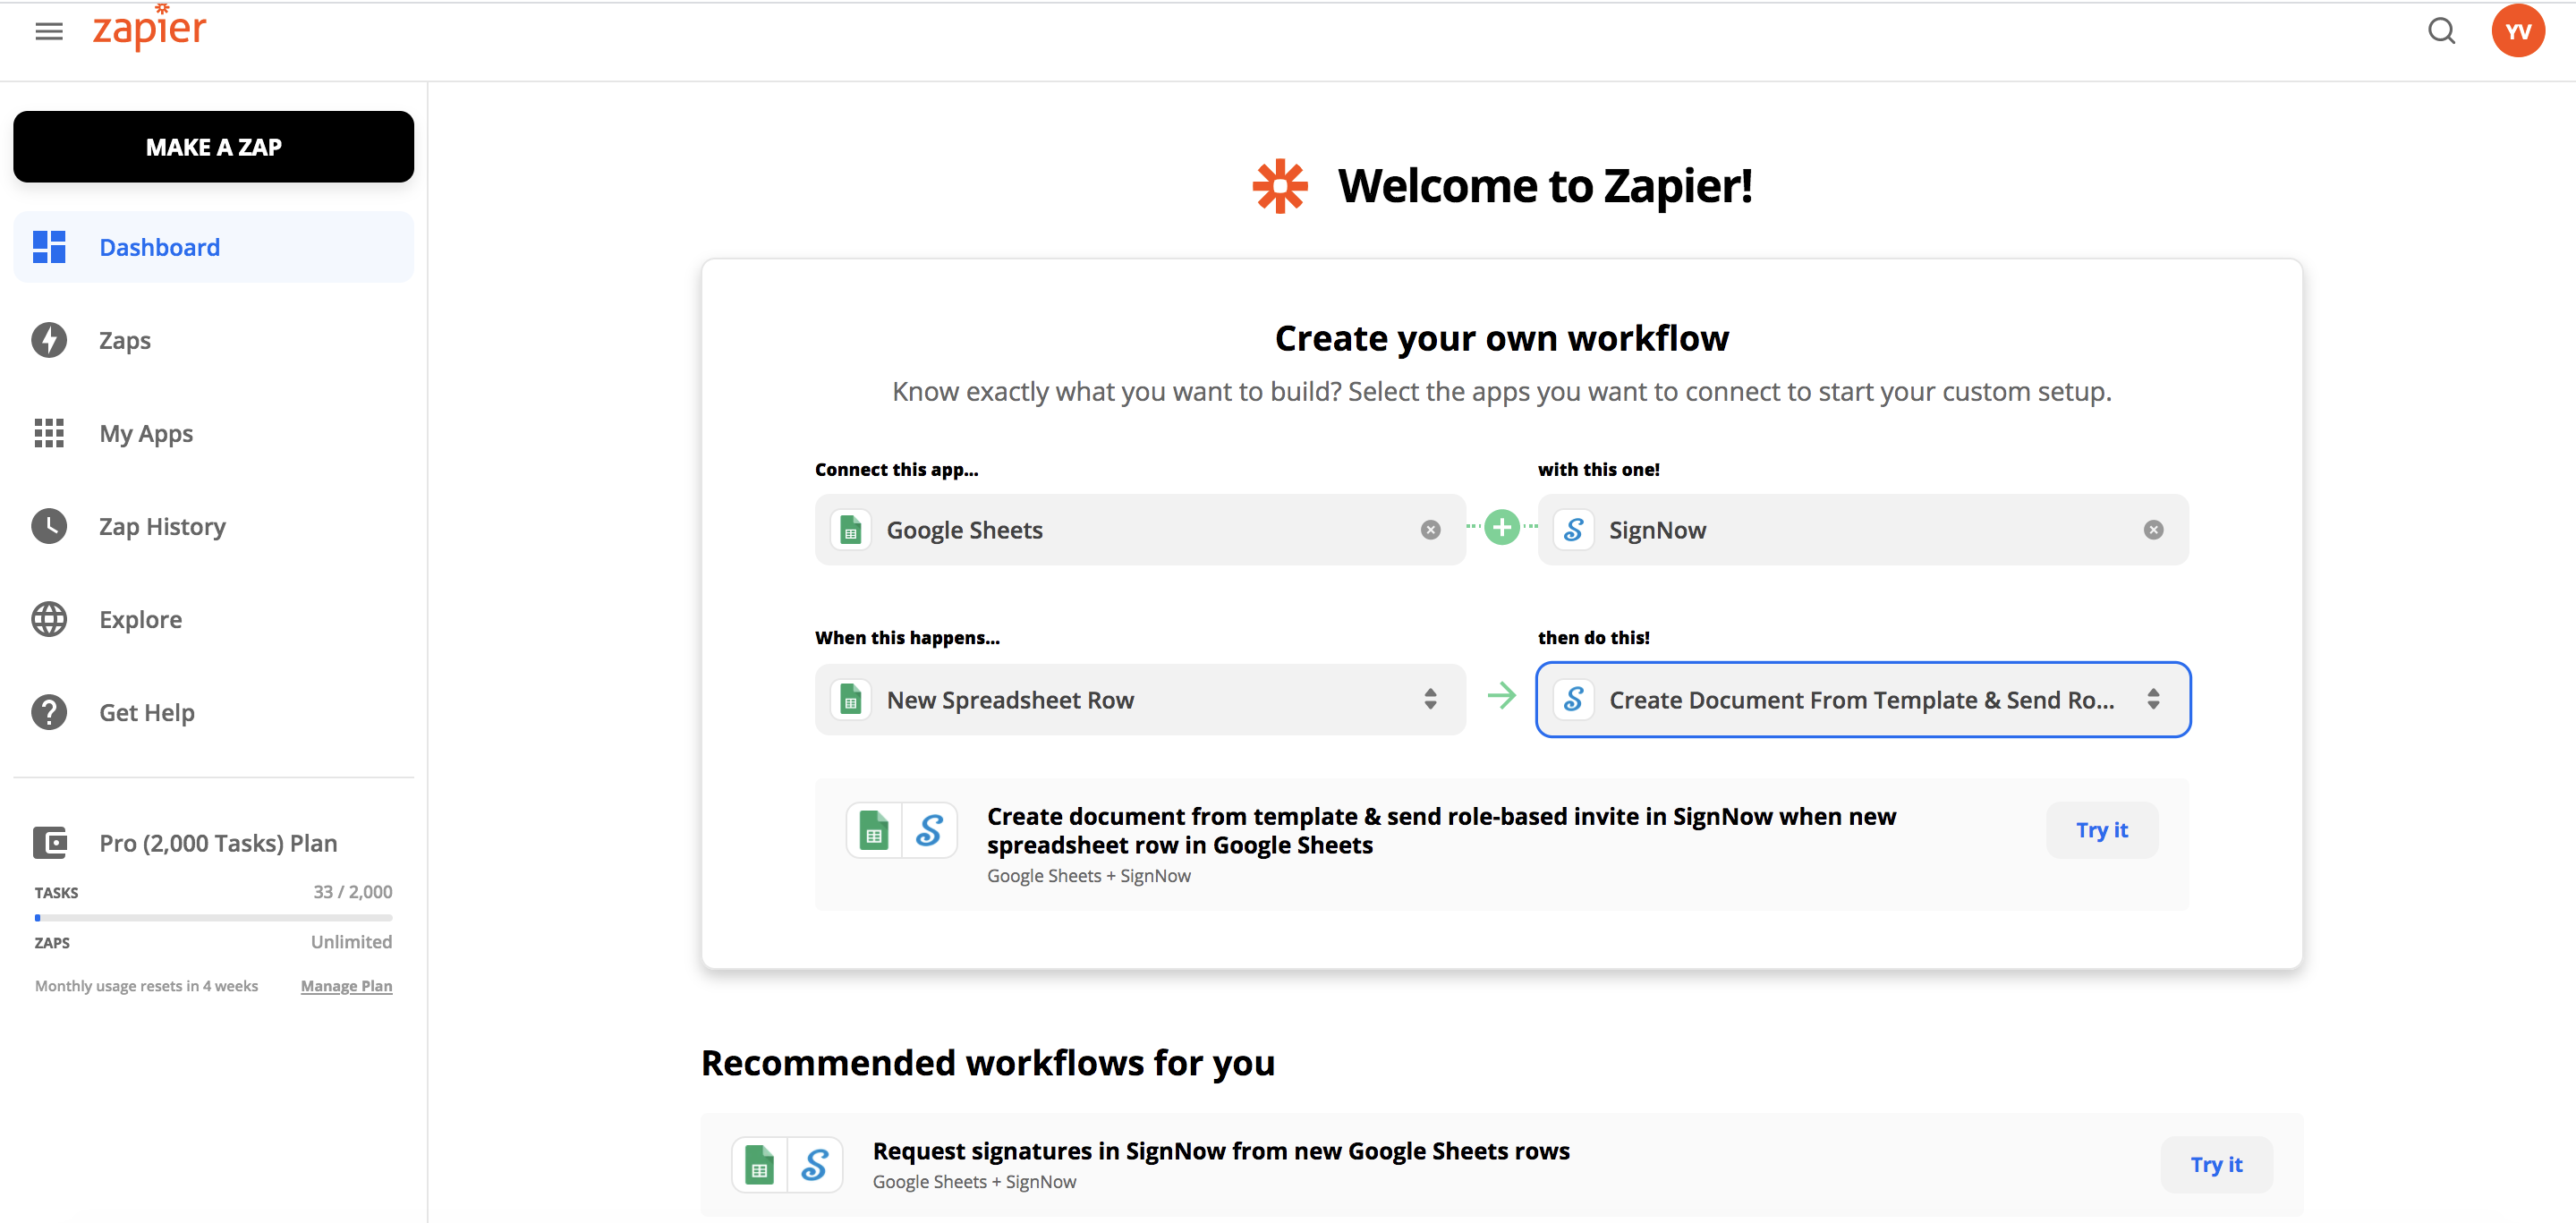 Step 1. Create your own workflow in Zapier